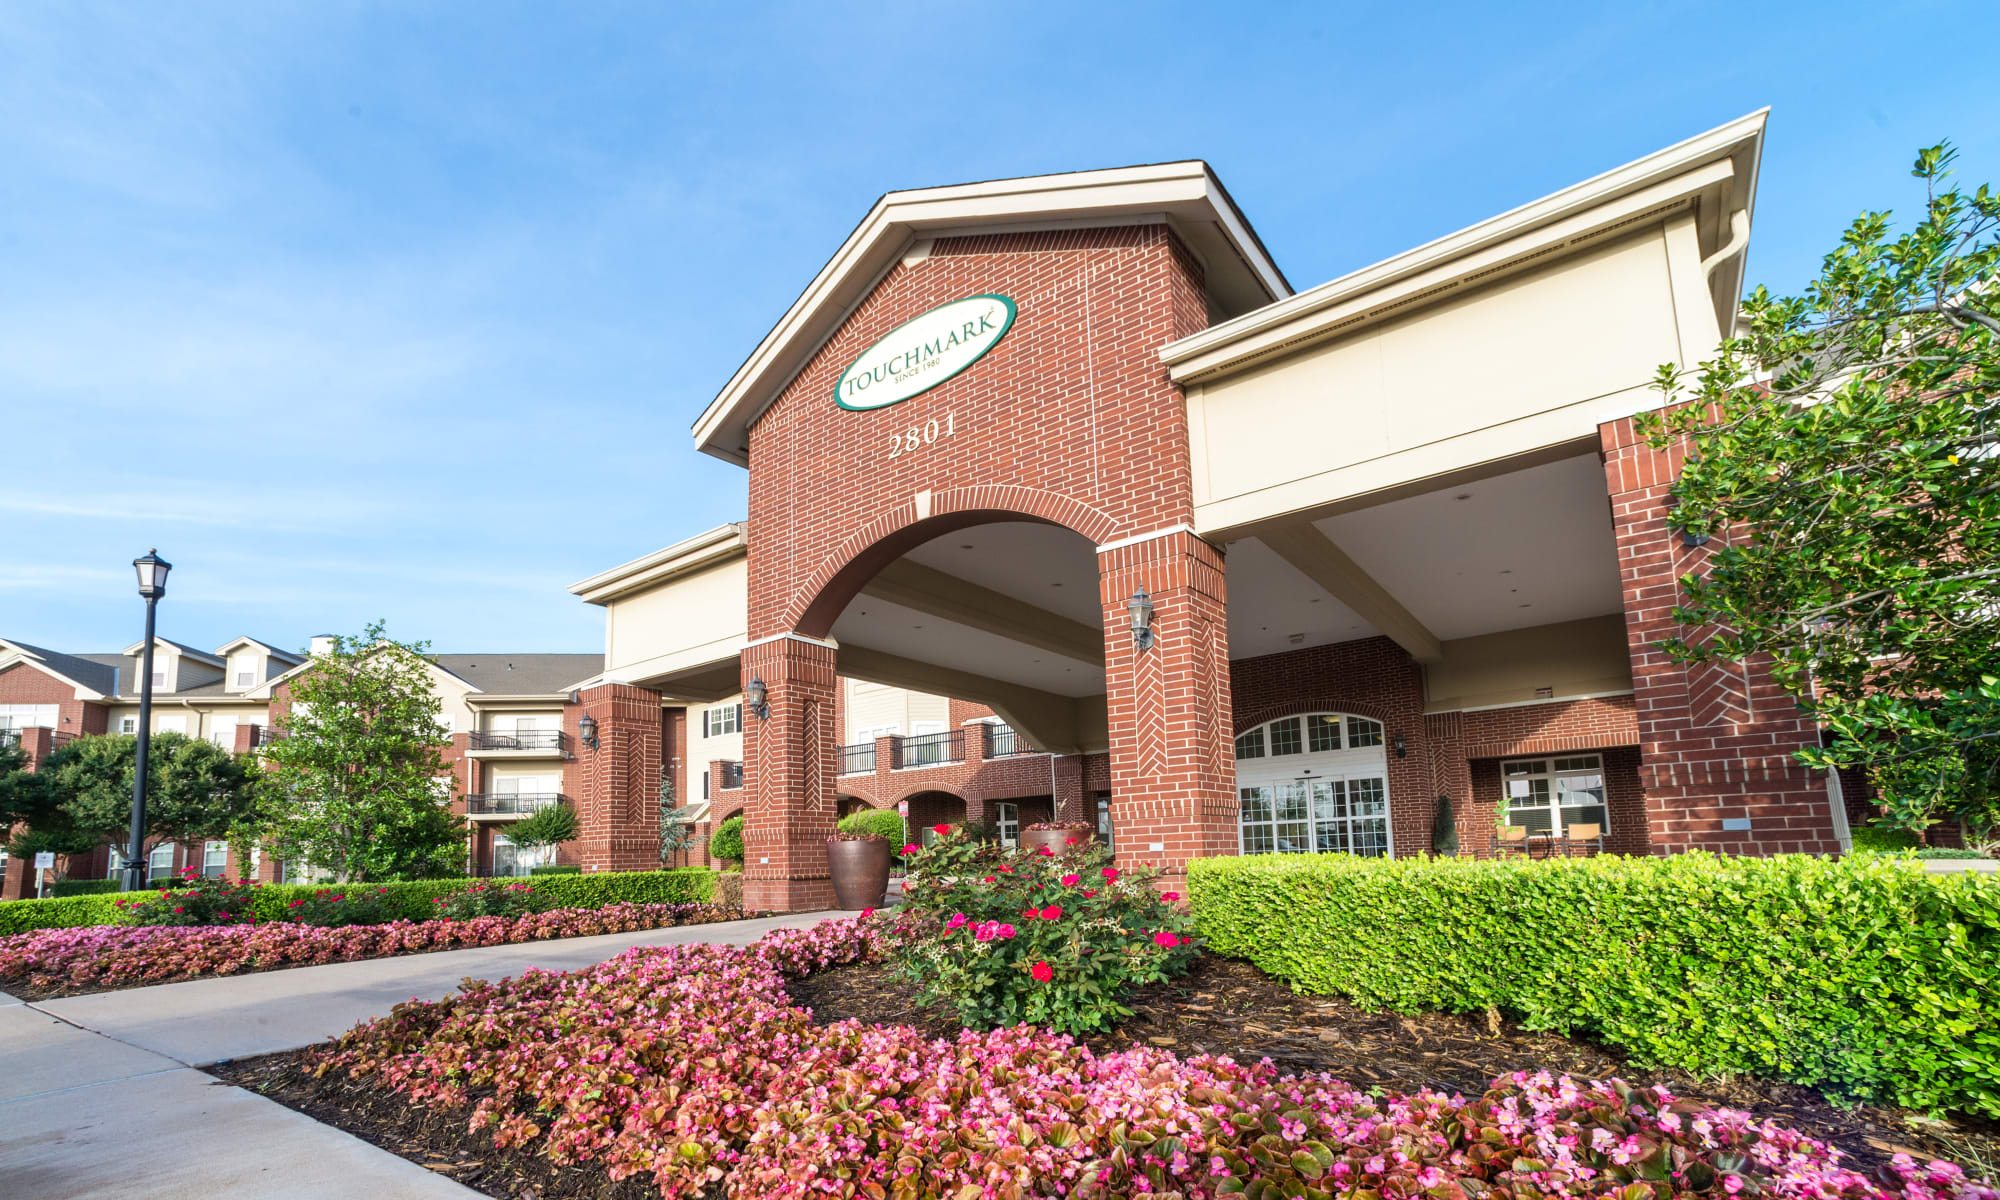 The building exterior and main entrance at Touchmark at Coffee Creek in Edmond, Oklahoma